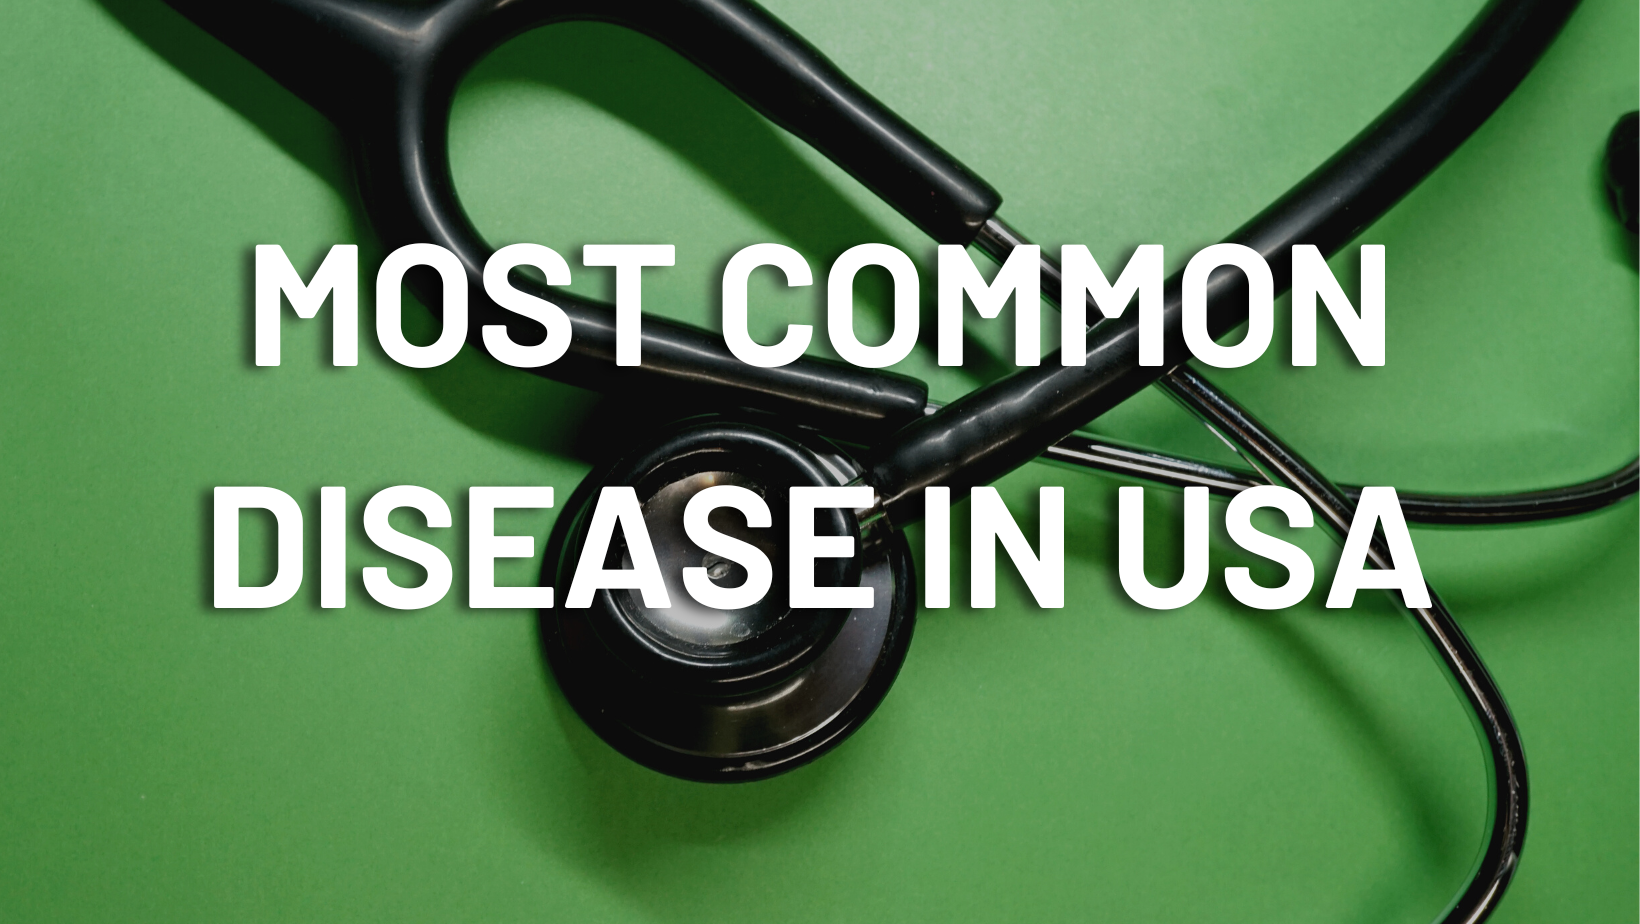 A stethoscope on a green background with the words most common disease in usa